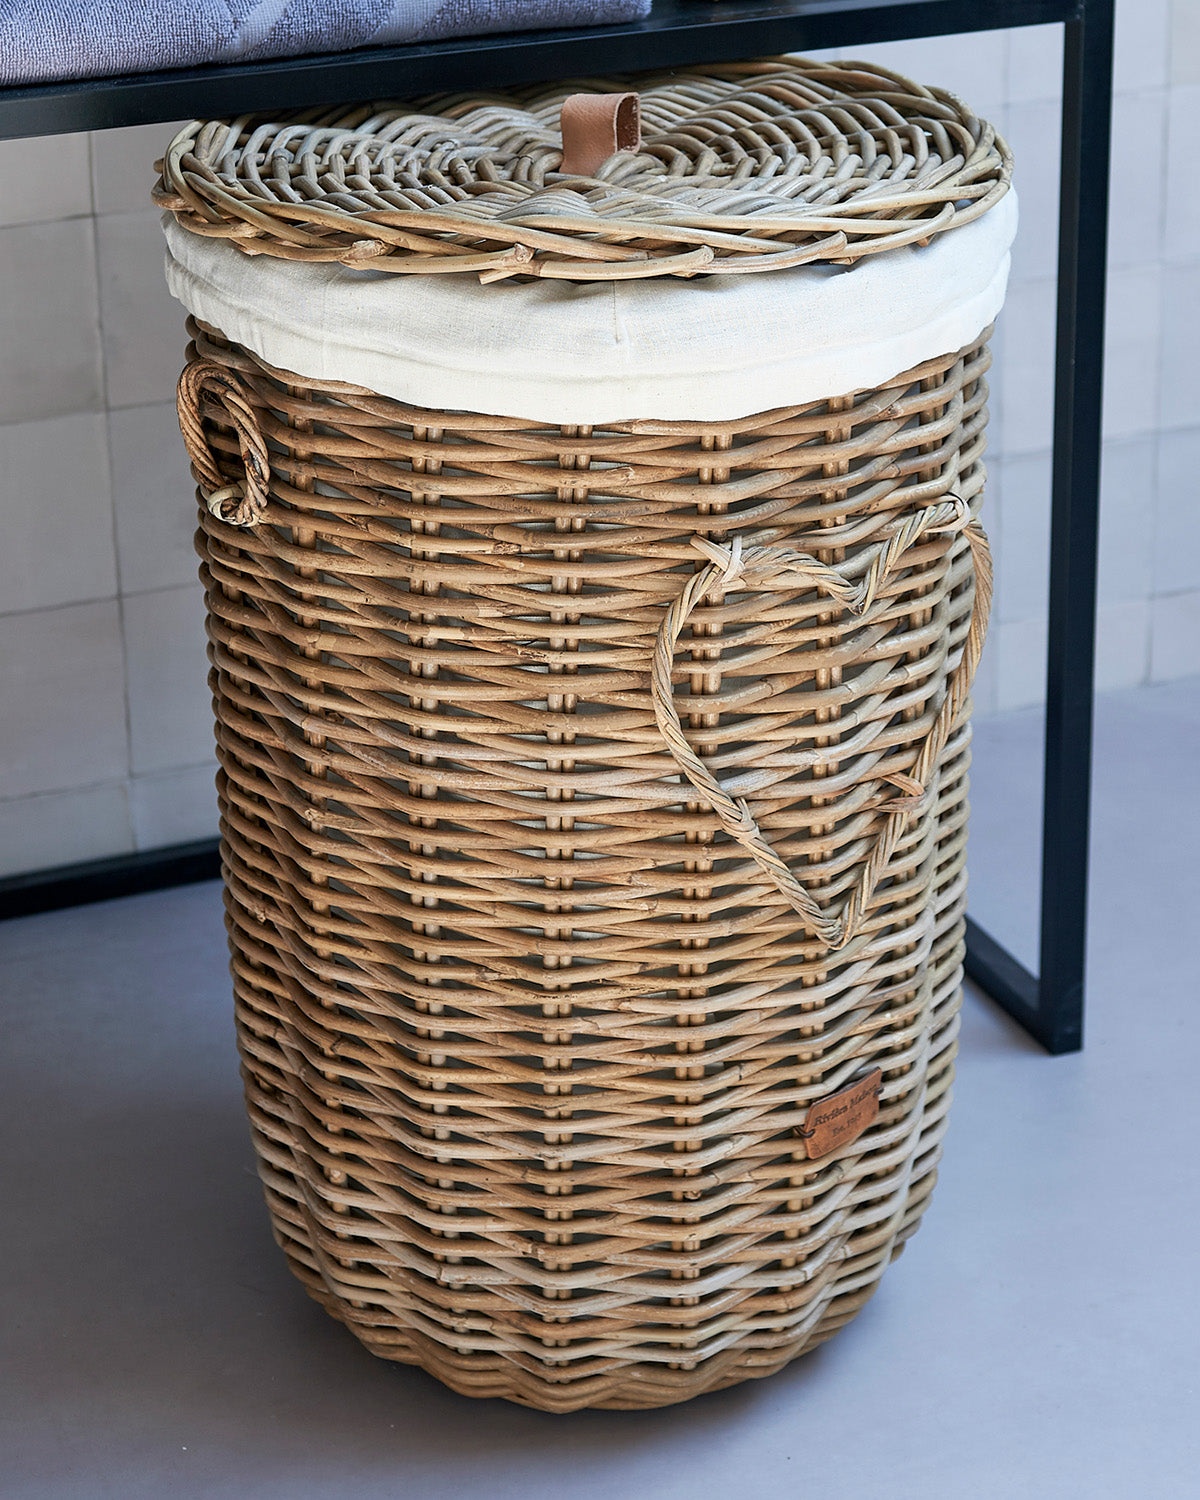 LAUNDRY BASKET made from rattan, inside the laundry basket with robust cotton by Riviera Maison